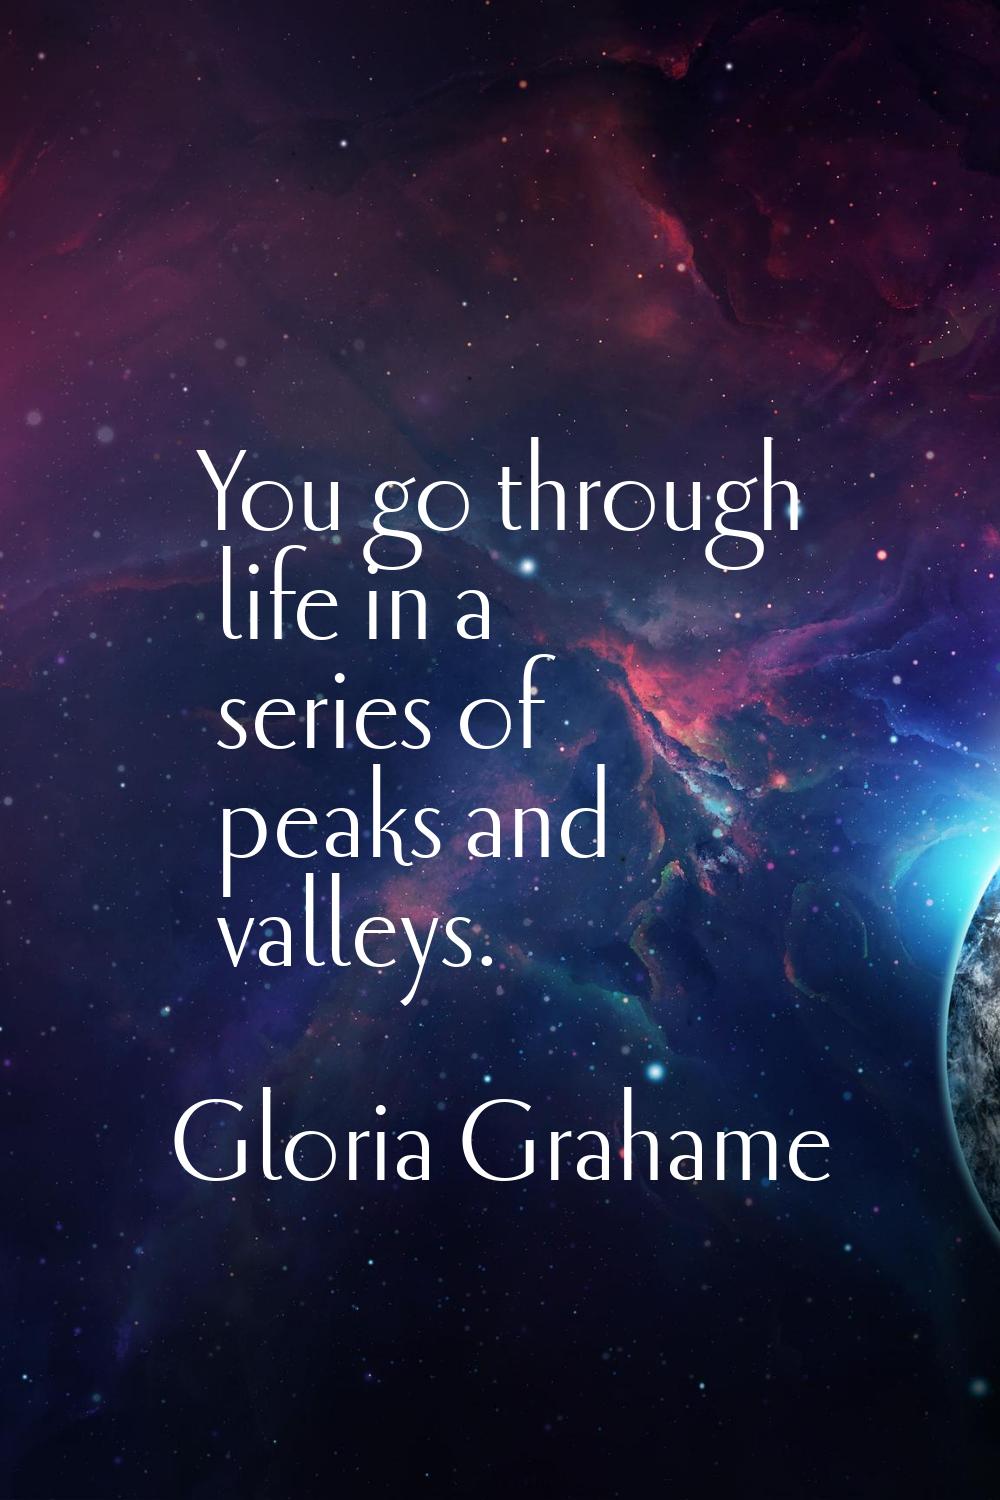 You go through life in a series of peaks and valleys.